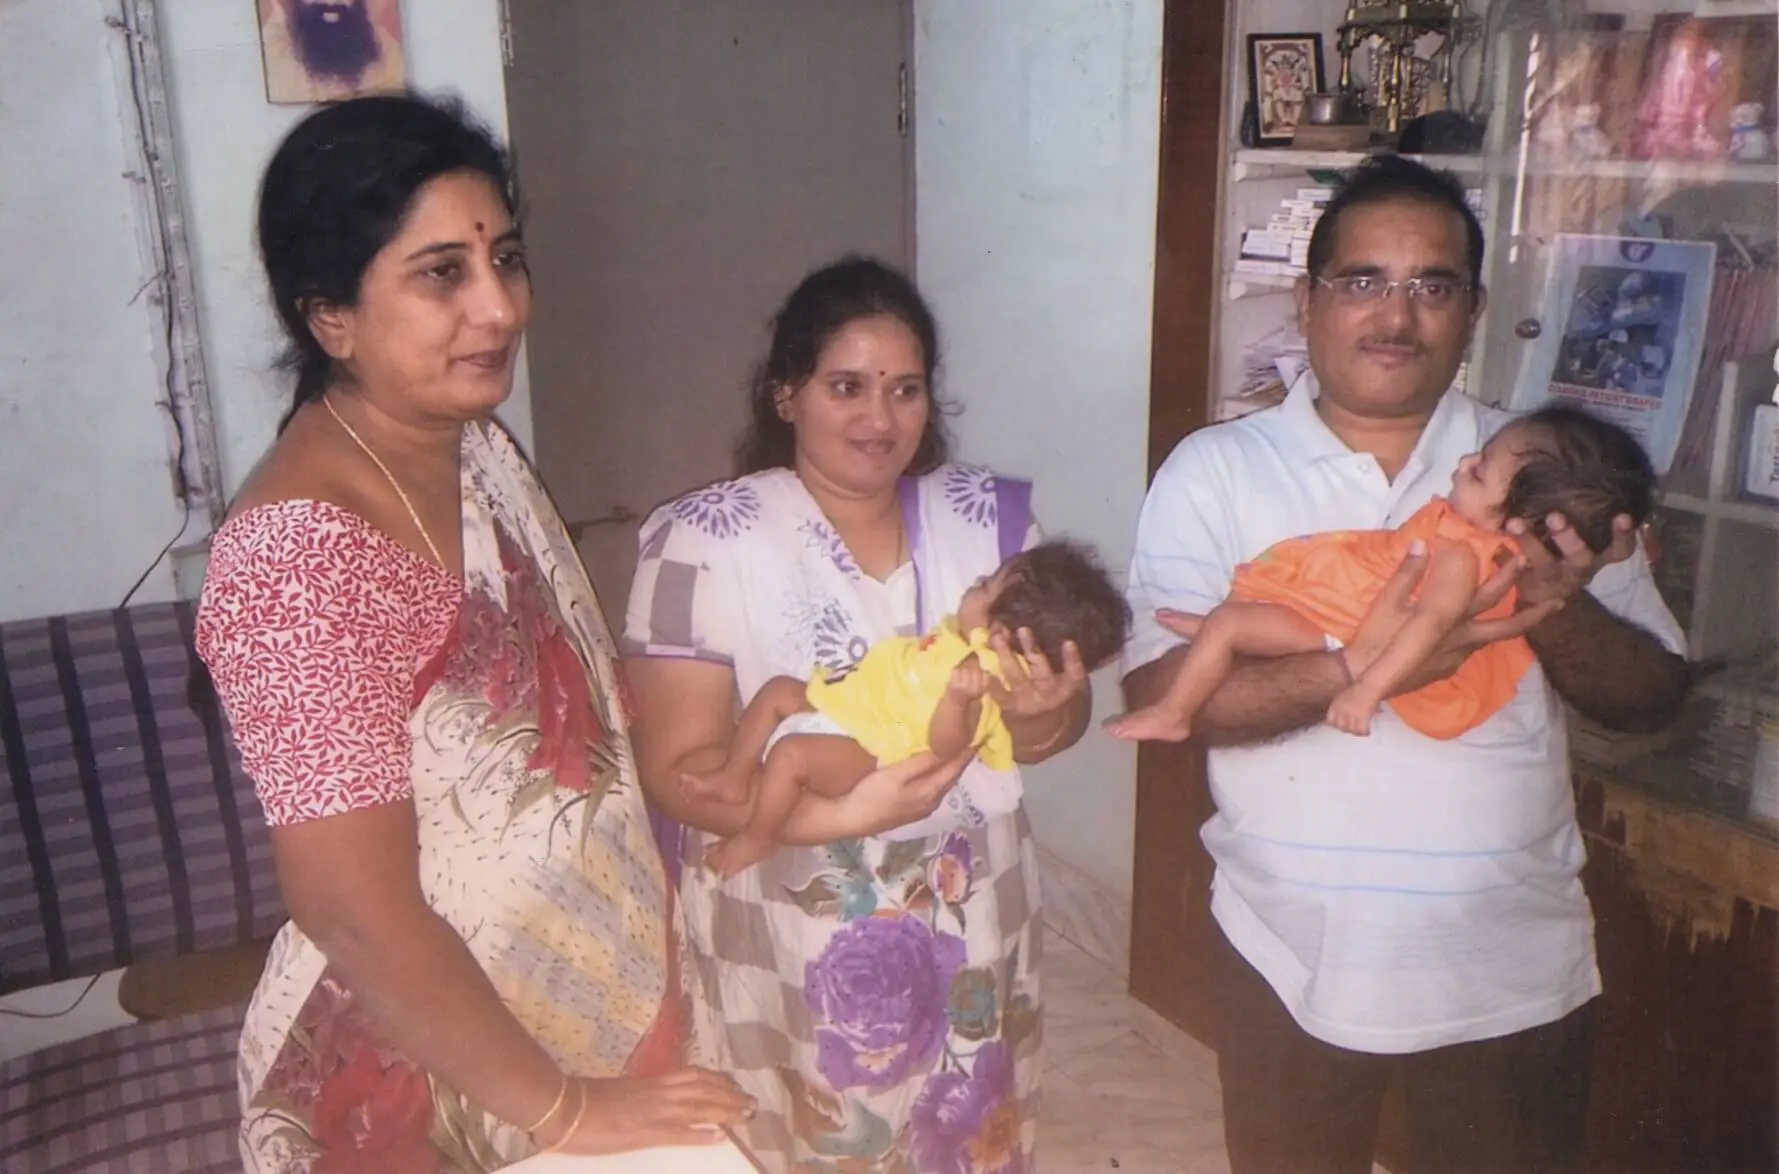 Dr. Rama devi Kolli standing beside the father and mother of IVF twins, each holding one infant in their arms. Photo from 2007.